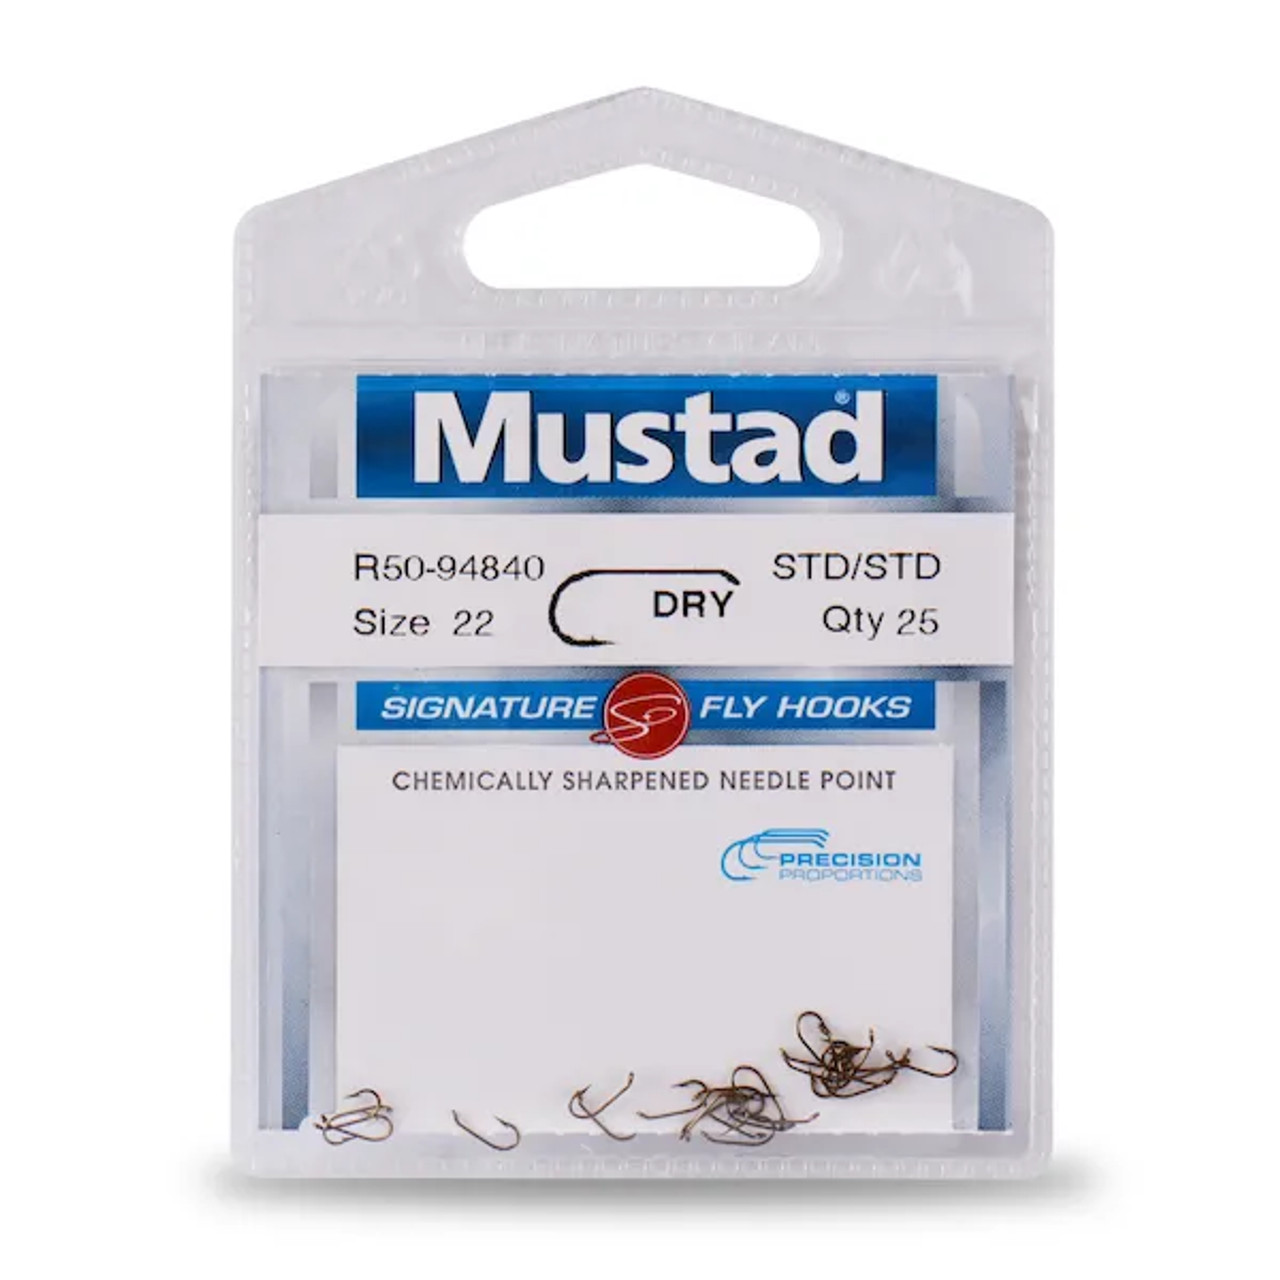 Mustad Nymph / Wet Signature Fly Hook - 2X STRONG 25-1000 PACK S70NP CHOOSE